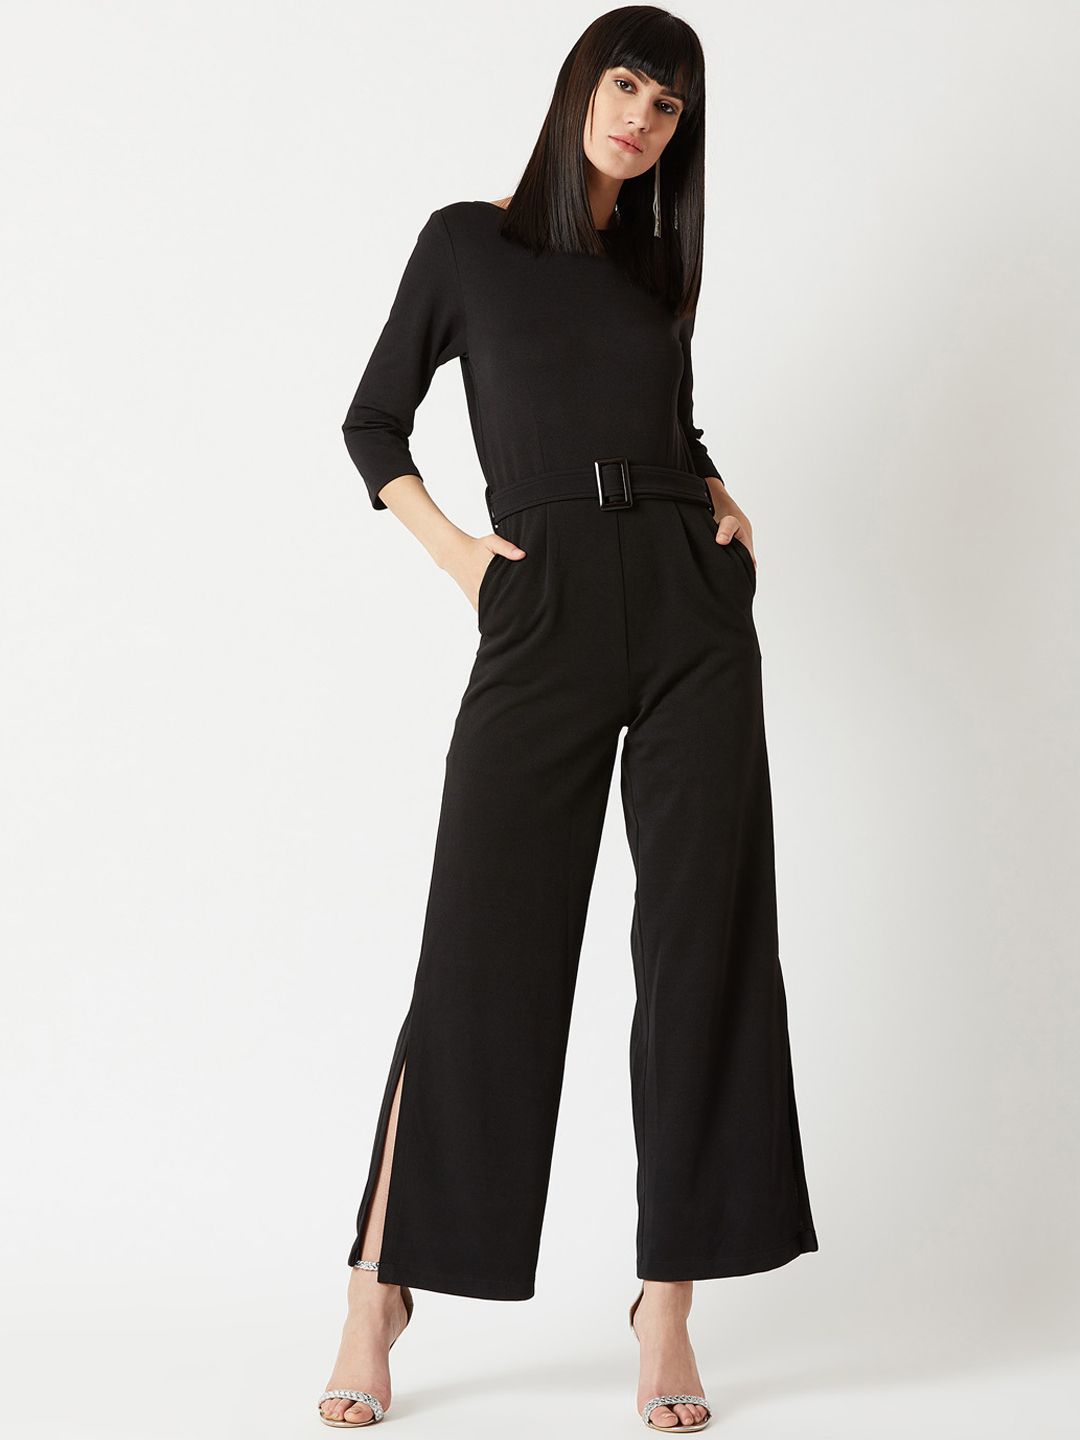 Miss Chase Black Solid Basic Jumpsuit Price in India